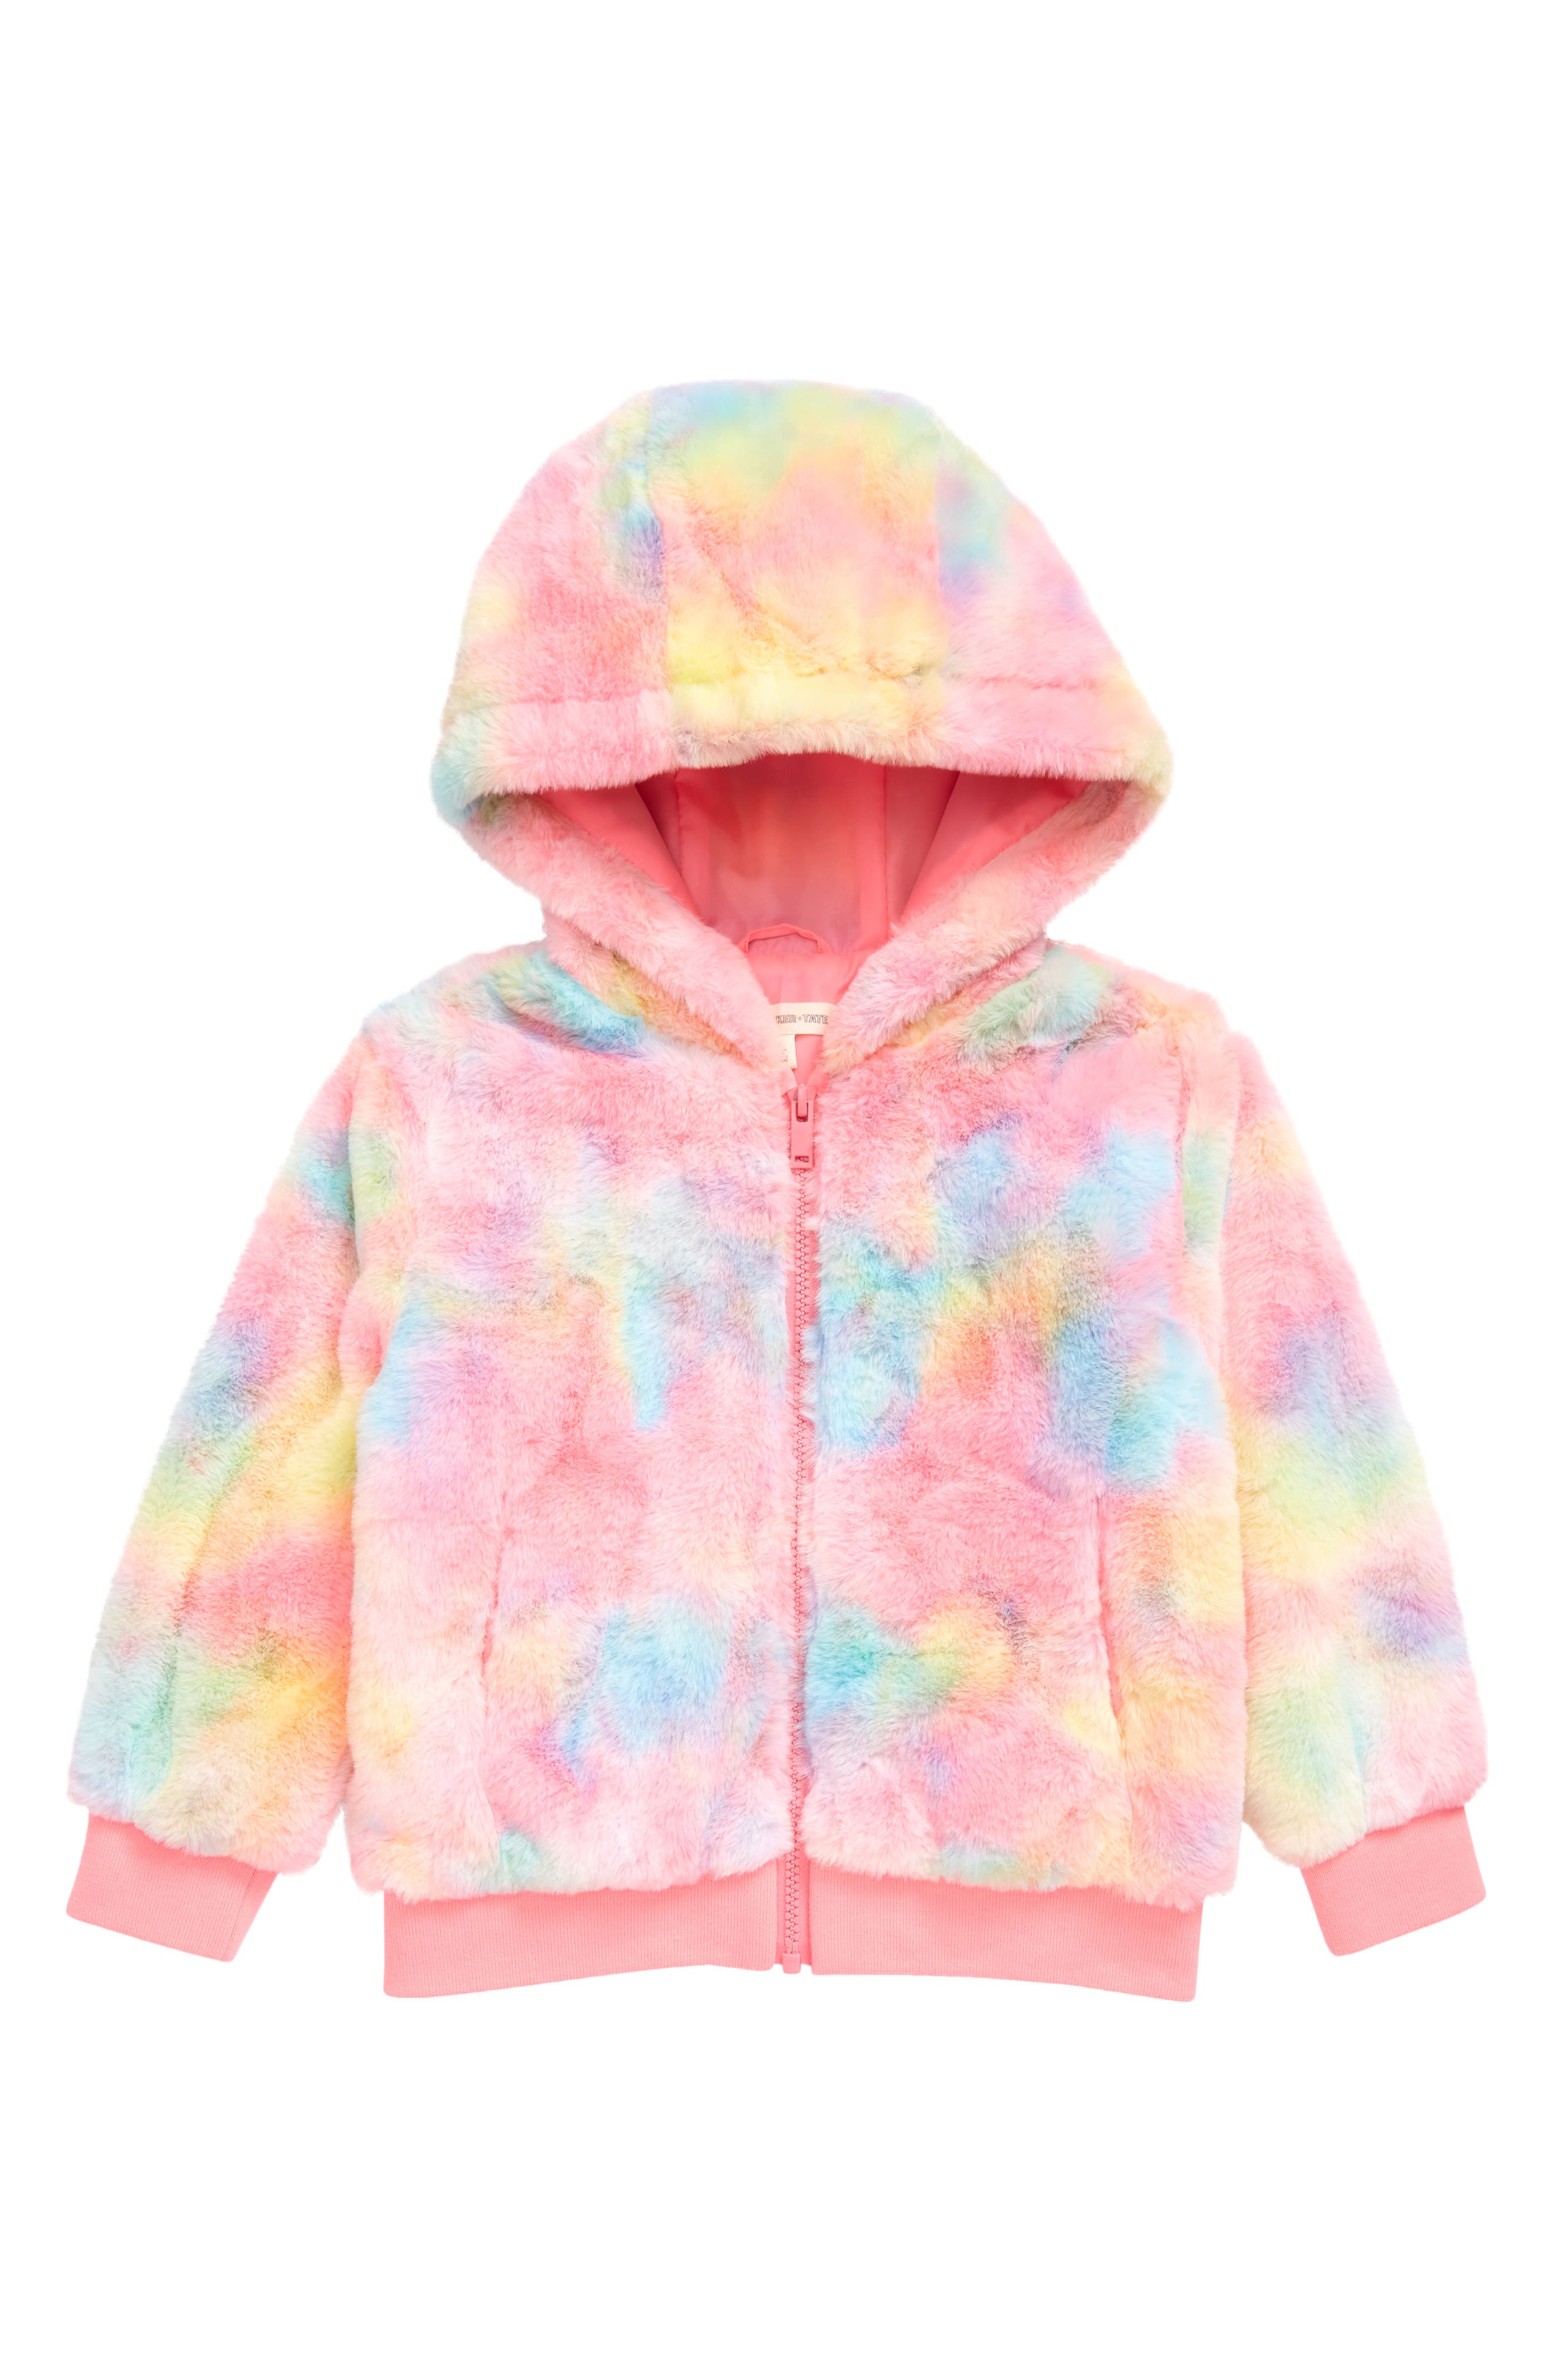 Essentials Girls and Toddlers' Faux Fur Jacket 